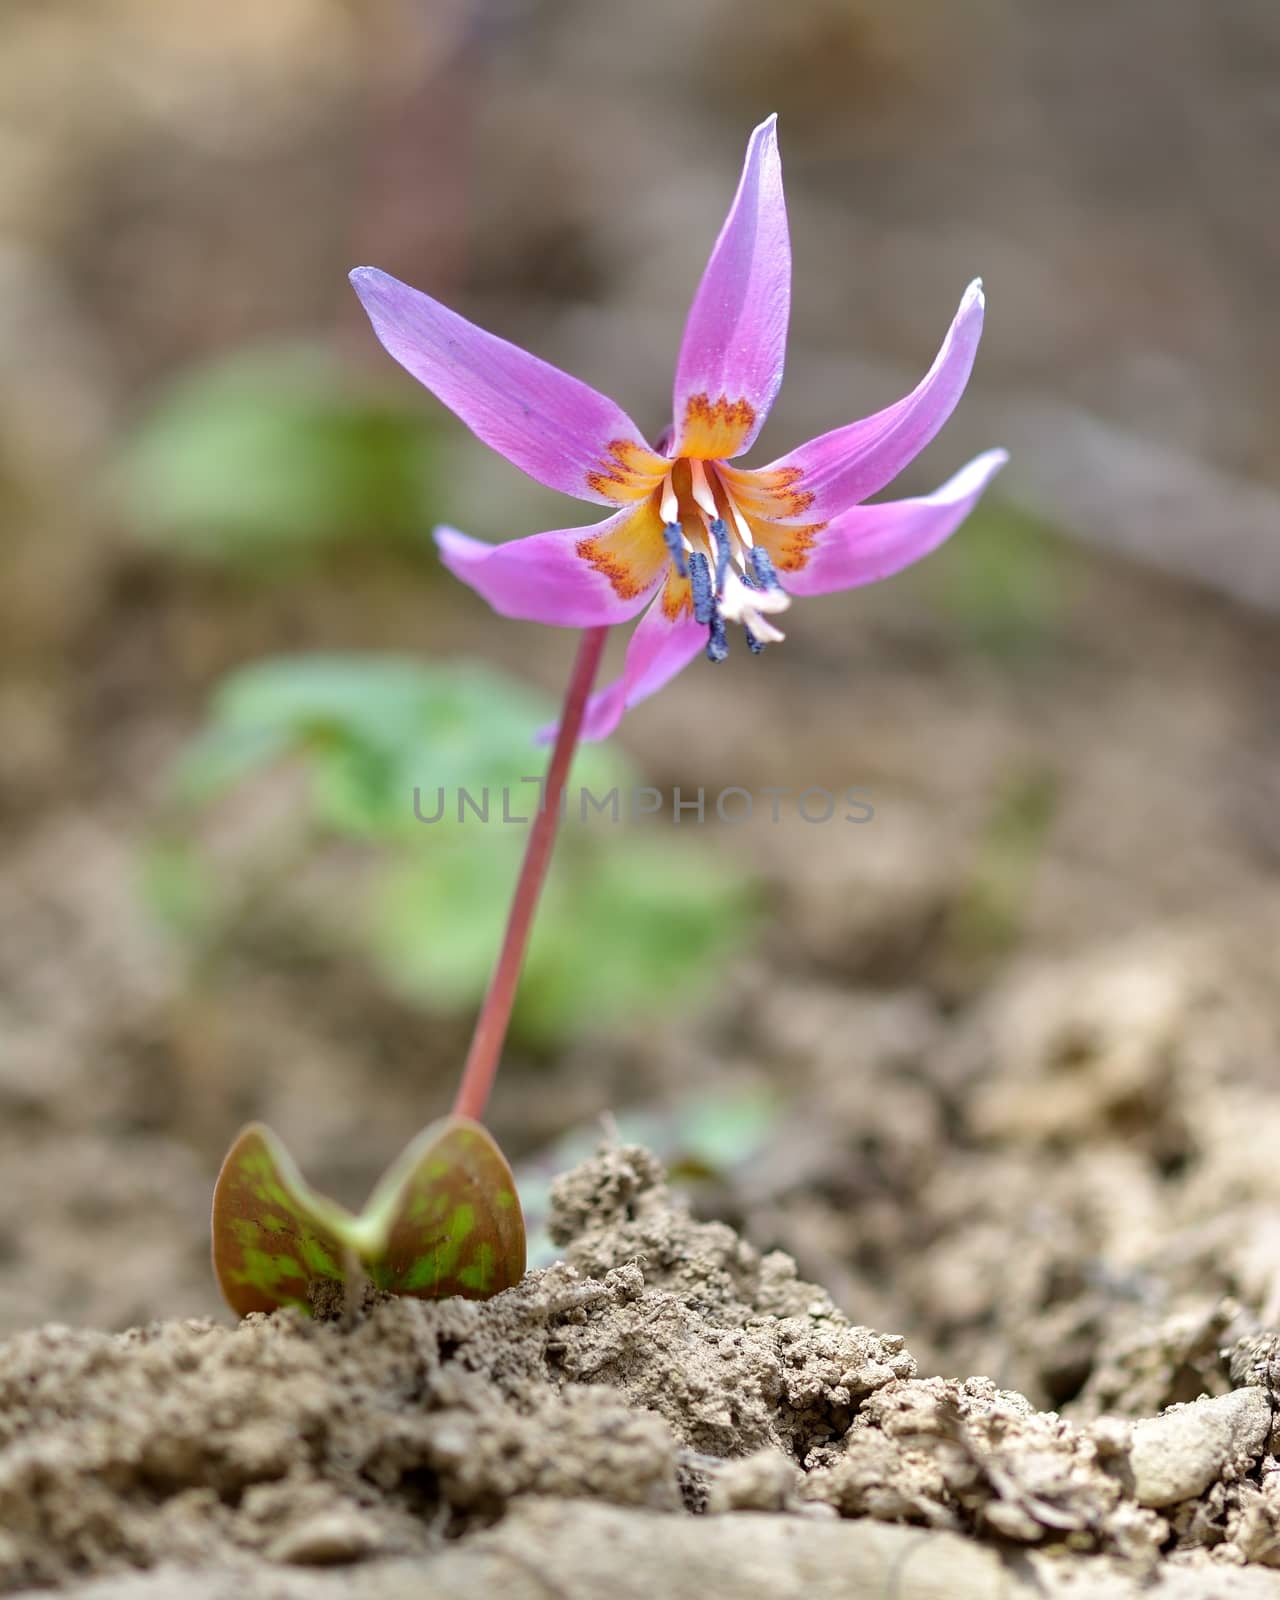 Dog-tooth Violet by comet